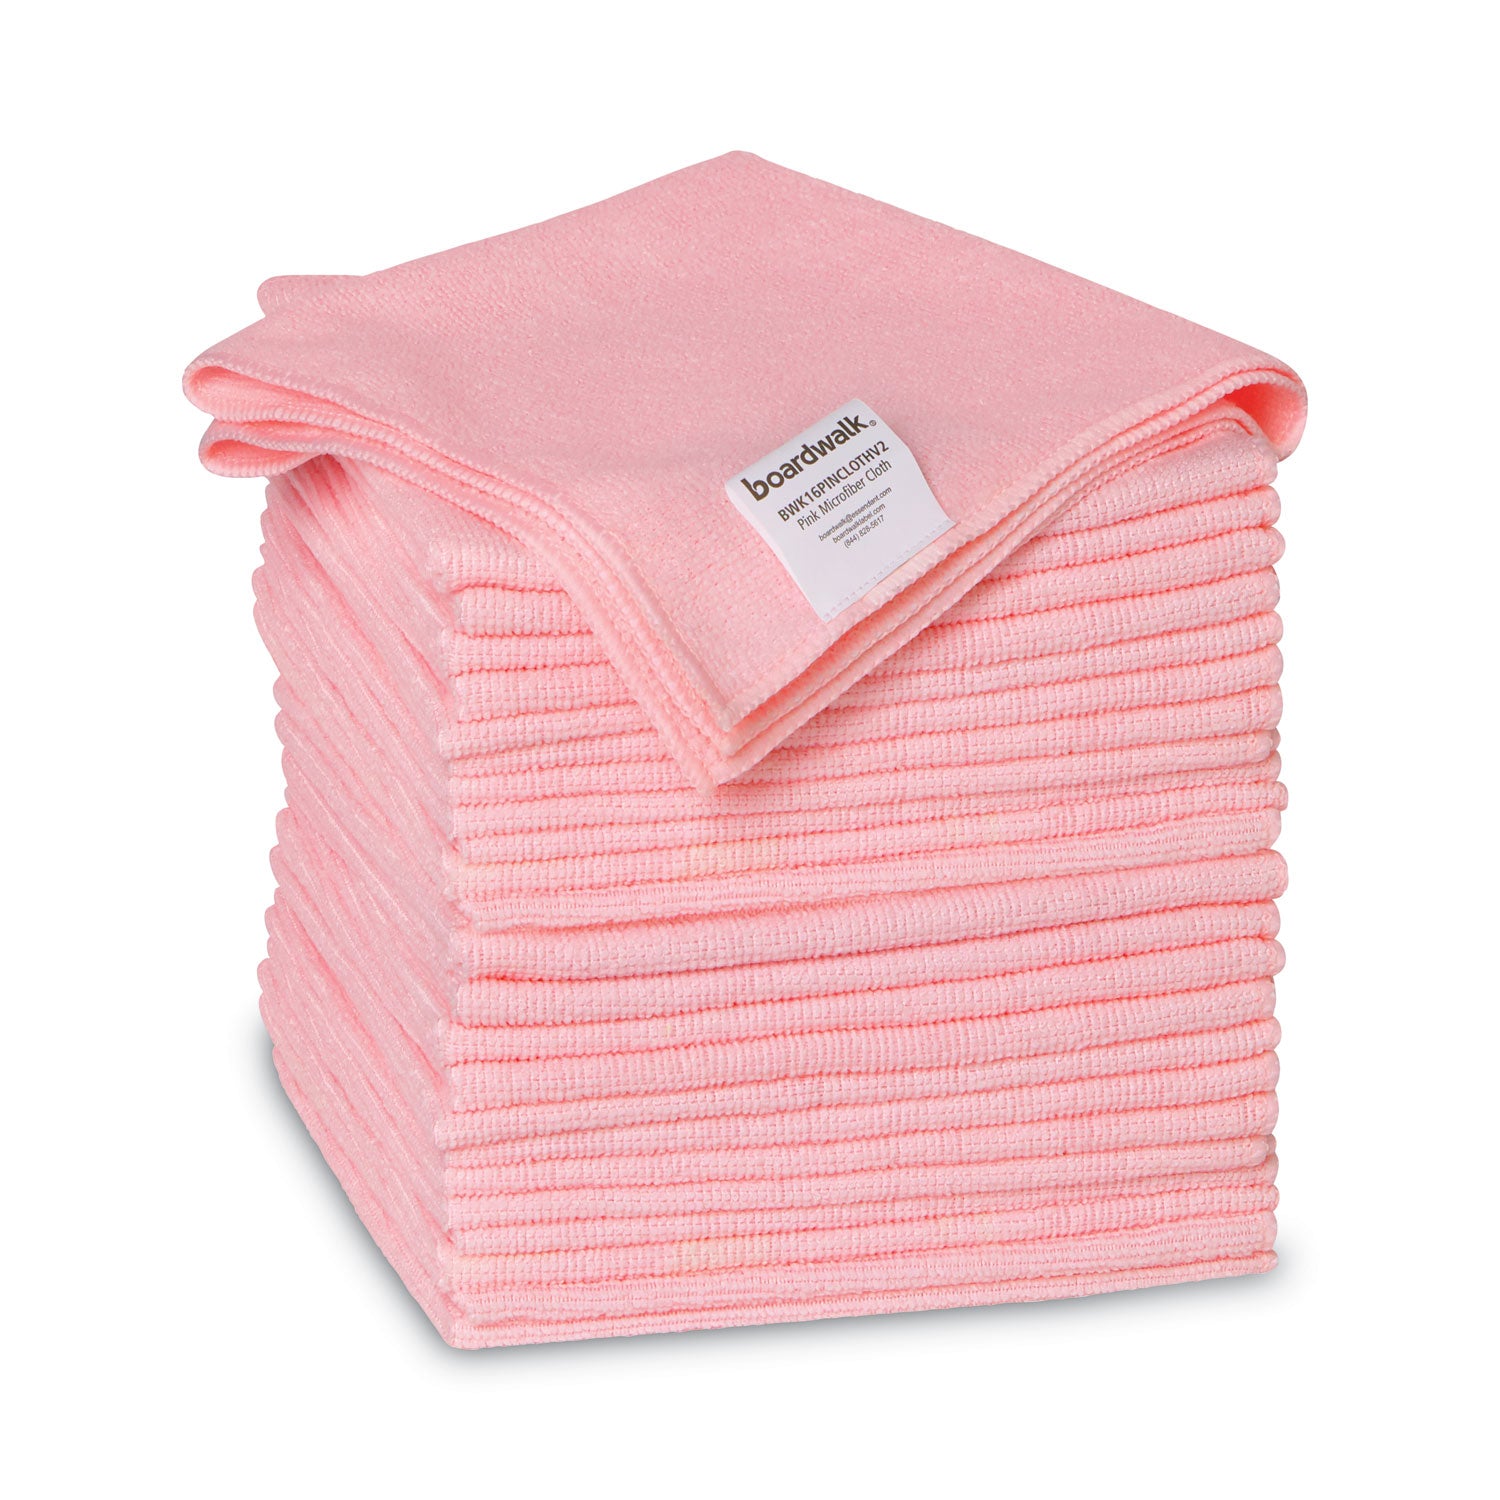 microfiber-cleaning-cloths-16-x-16-pink-24-pack_bwk16pinclothv2 - 1